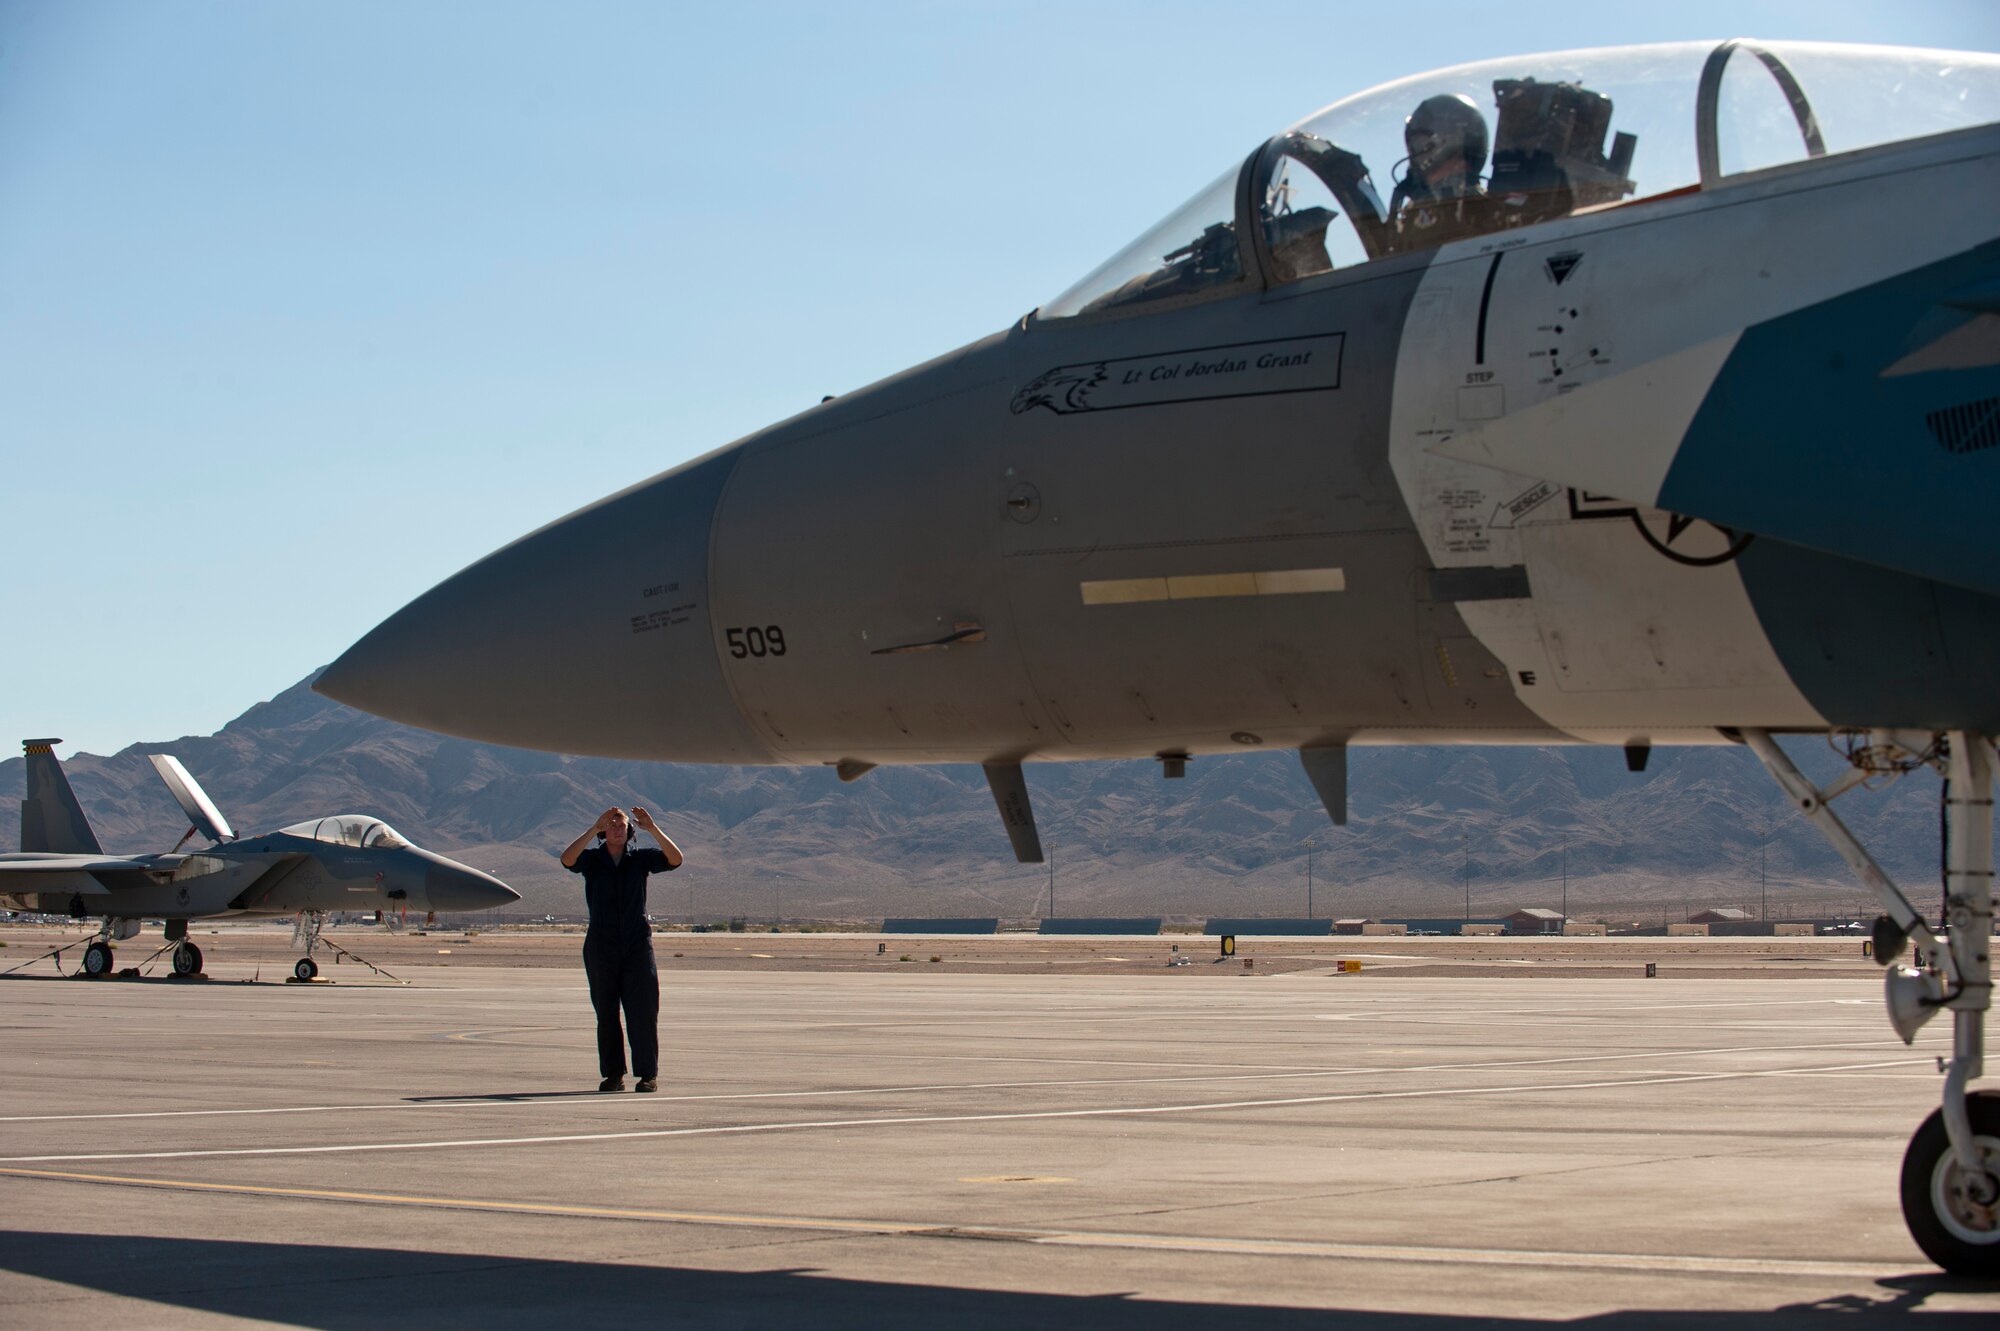 Staff Sgt. Justin White signals to Maj. Sam Joplin to begin taxiing a 65th Aggressor Squadron F-15 Eagle to the runway Sept. 18, 2014, at Nellis Air Force Base Nev. The roles and responsibilities of the 65th AGRS, deactivated Sept. 26, 2014, will be filled by the 64th AGRS. White is a crew chief with the 757th Aircraft Maintenance Squadron’s Flanker Aircraft Maintenance Unit and Joplin is an F-15 pilot with the 122nd Fighter Squadron at Naval Air Station Joint Reserve Base New Orleans. (U.S. Air Force photo/Airman 1st Class Thomas Spangler)